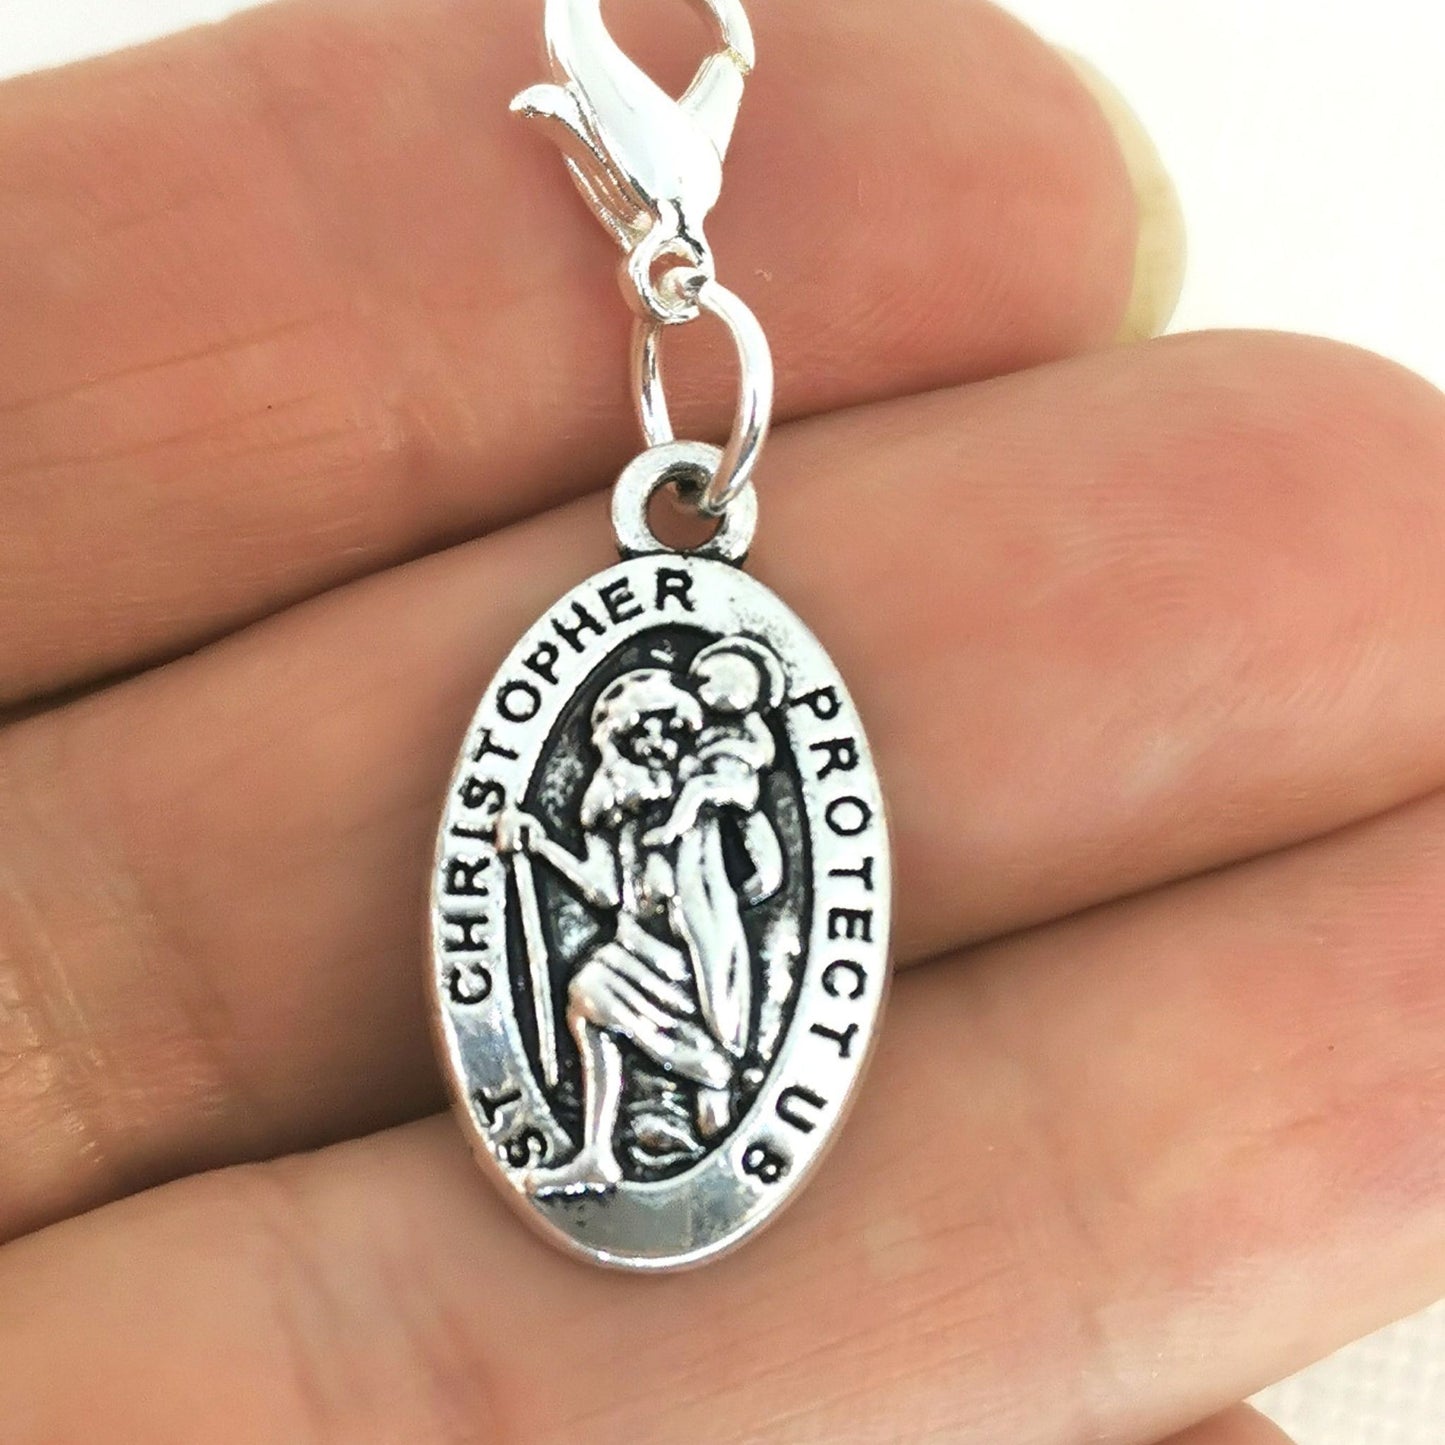 St. Christopher Clip On Protection Charm